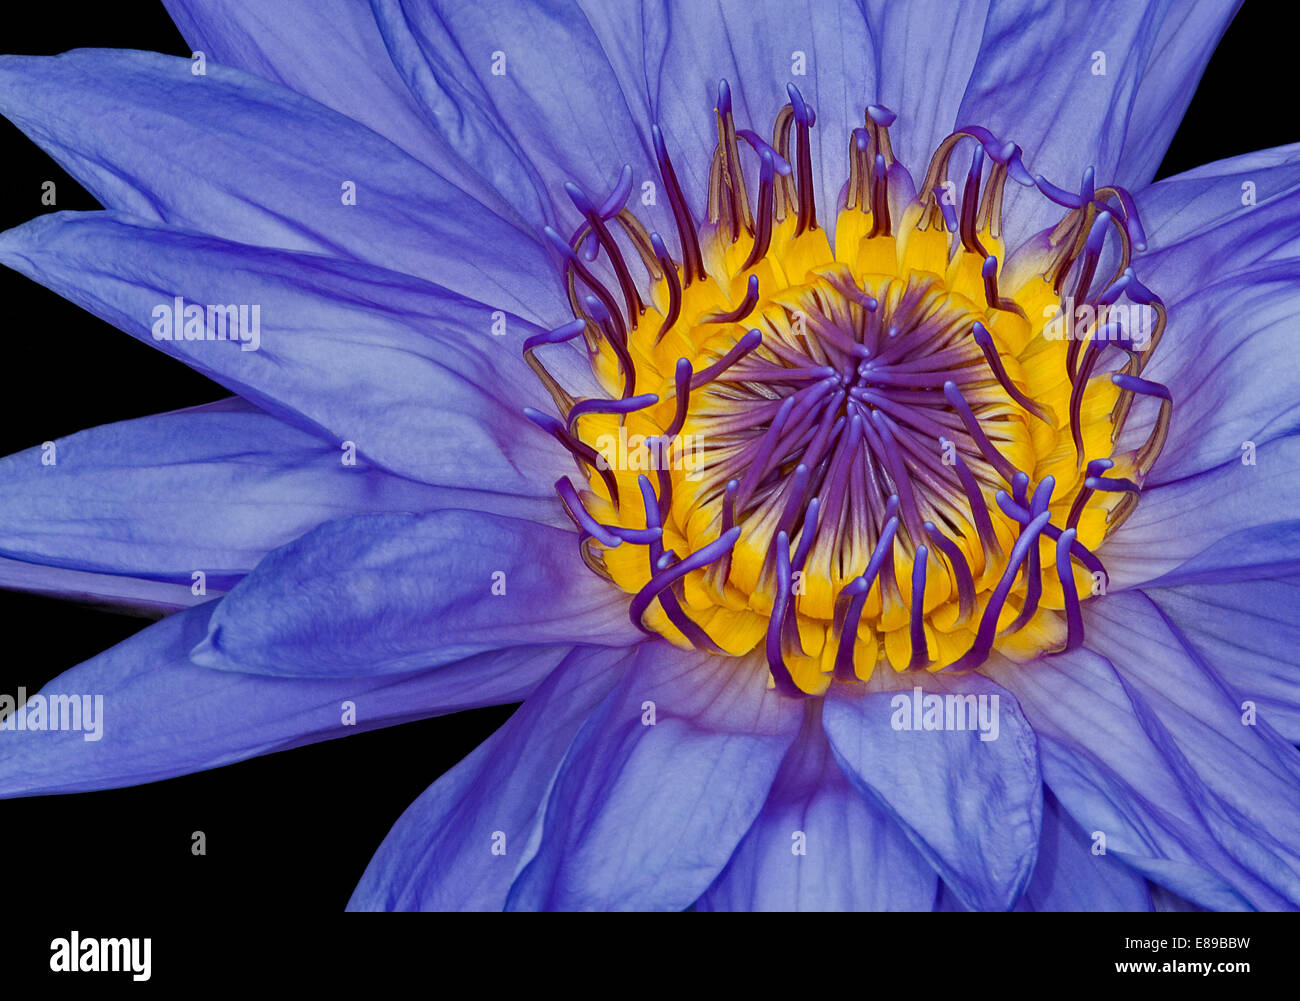 A beautiful lavender and gold close up view of a Tropical Day Flowering Waterlily. Stock Photo